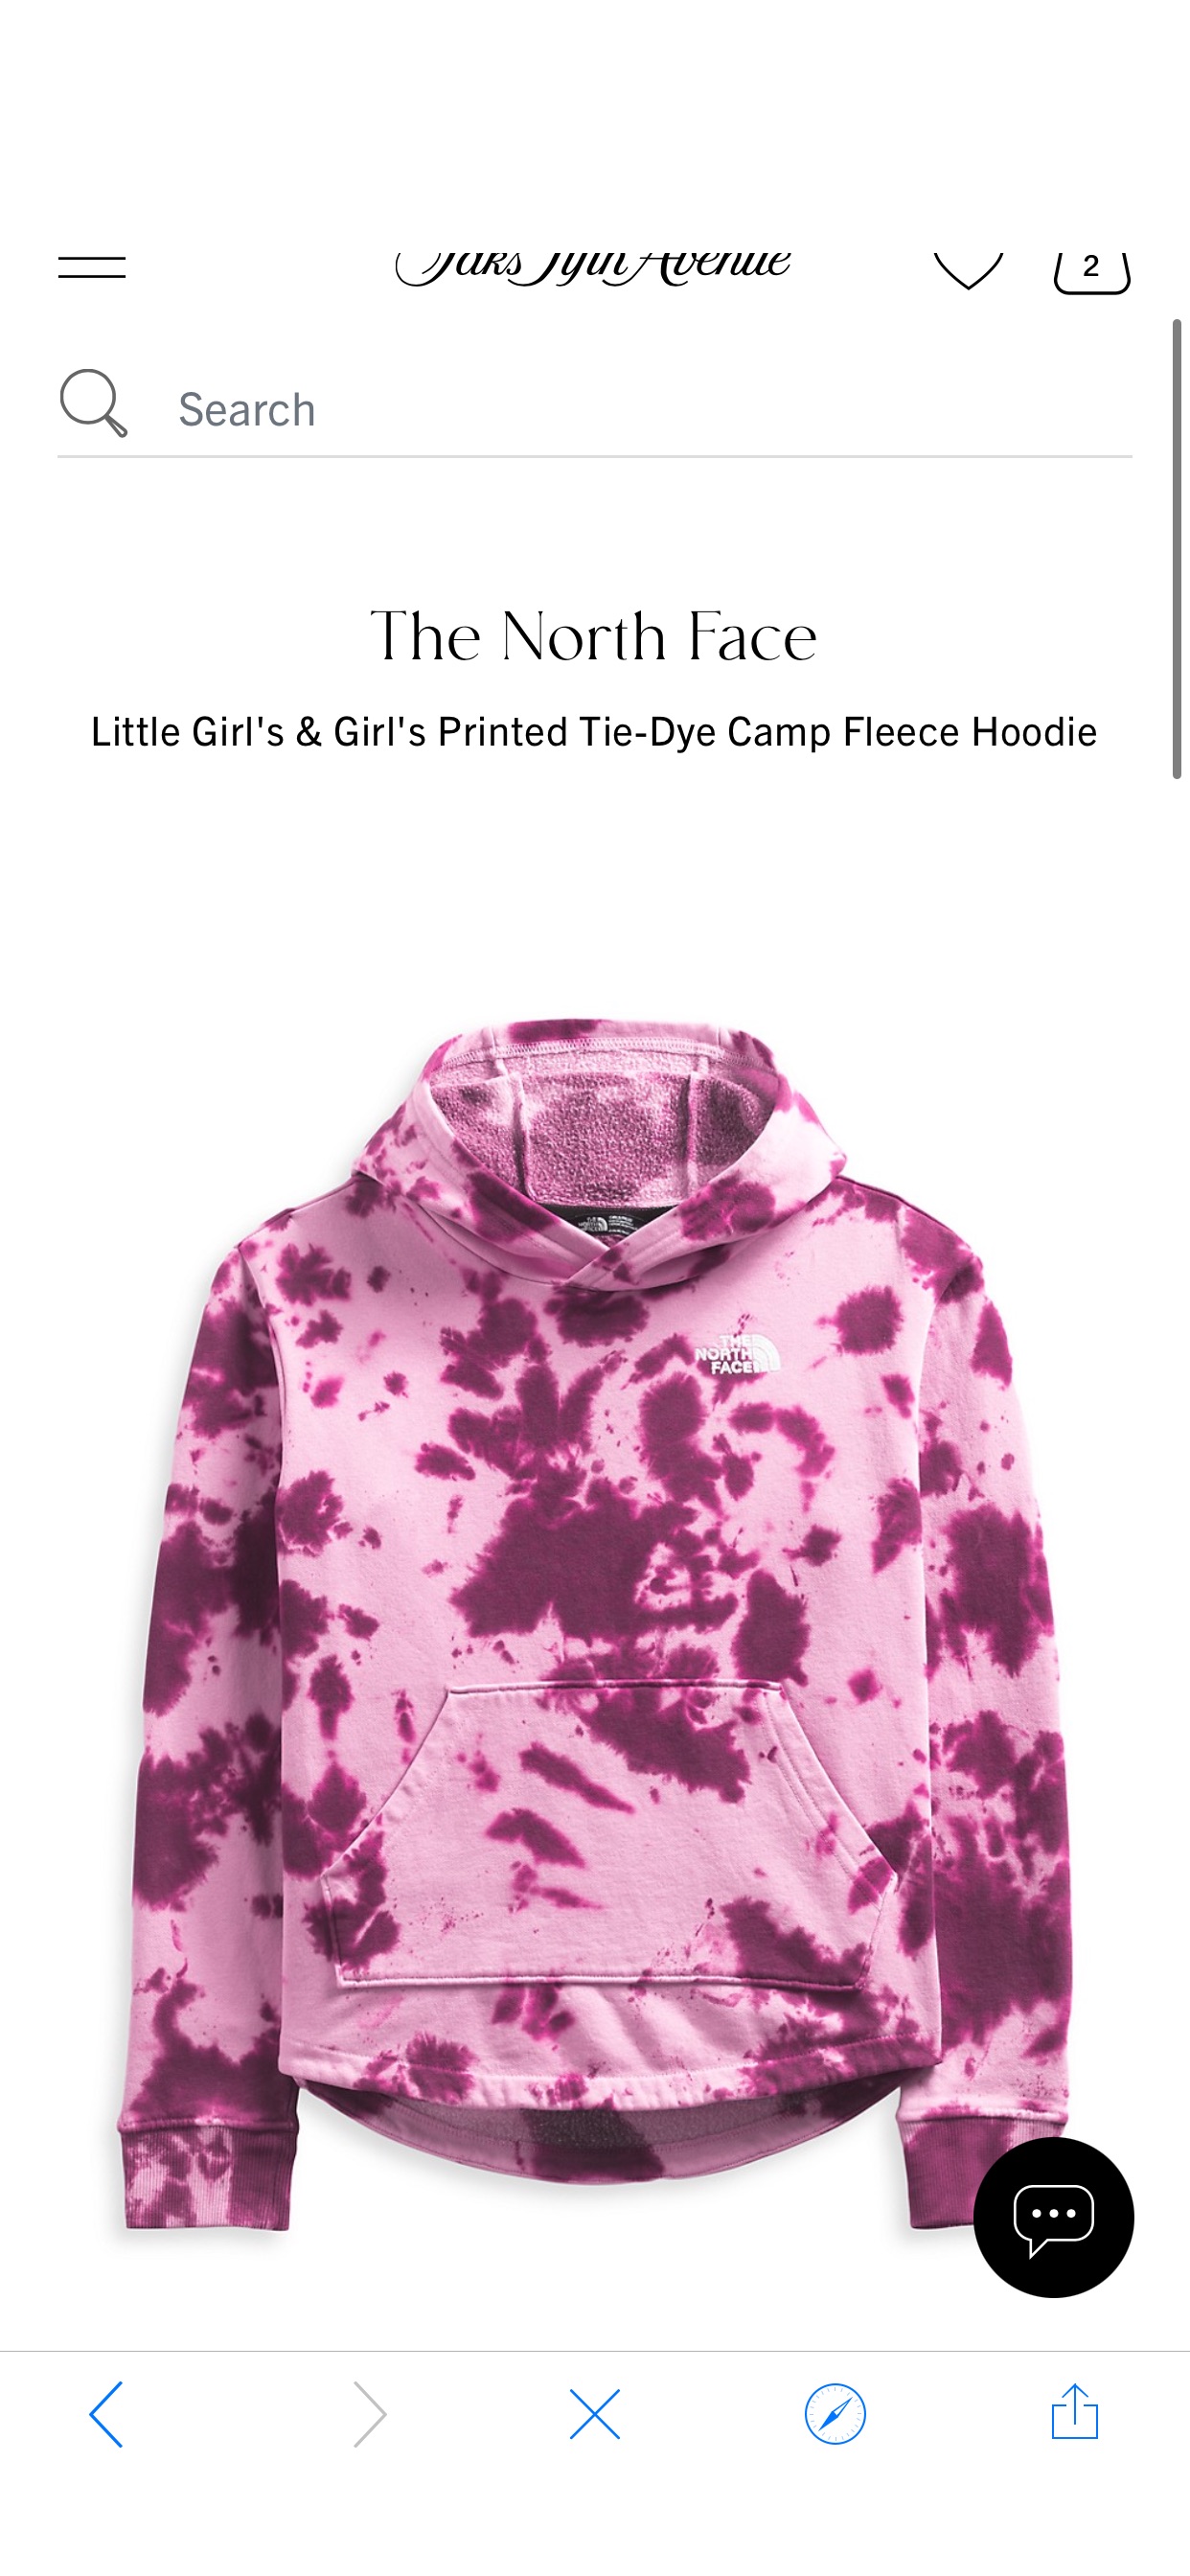 Shop The North Face Little Girl's & Girl's Printed Tie-Dye Camp Fleece Hoodie | Saks Fifth Avenue